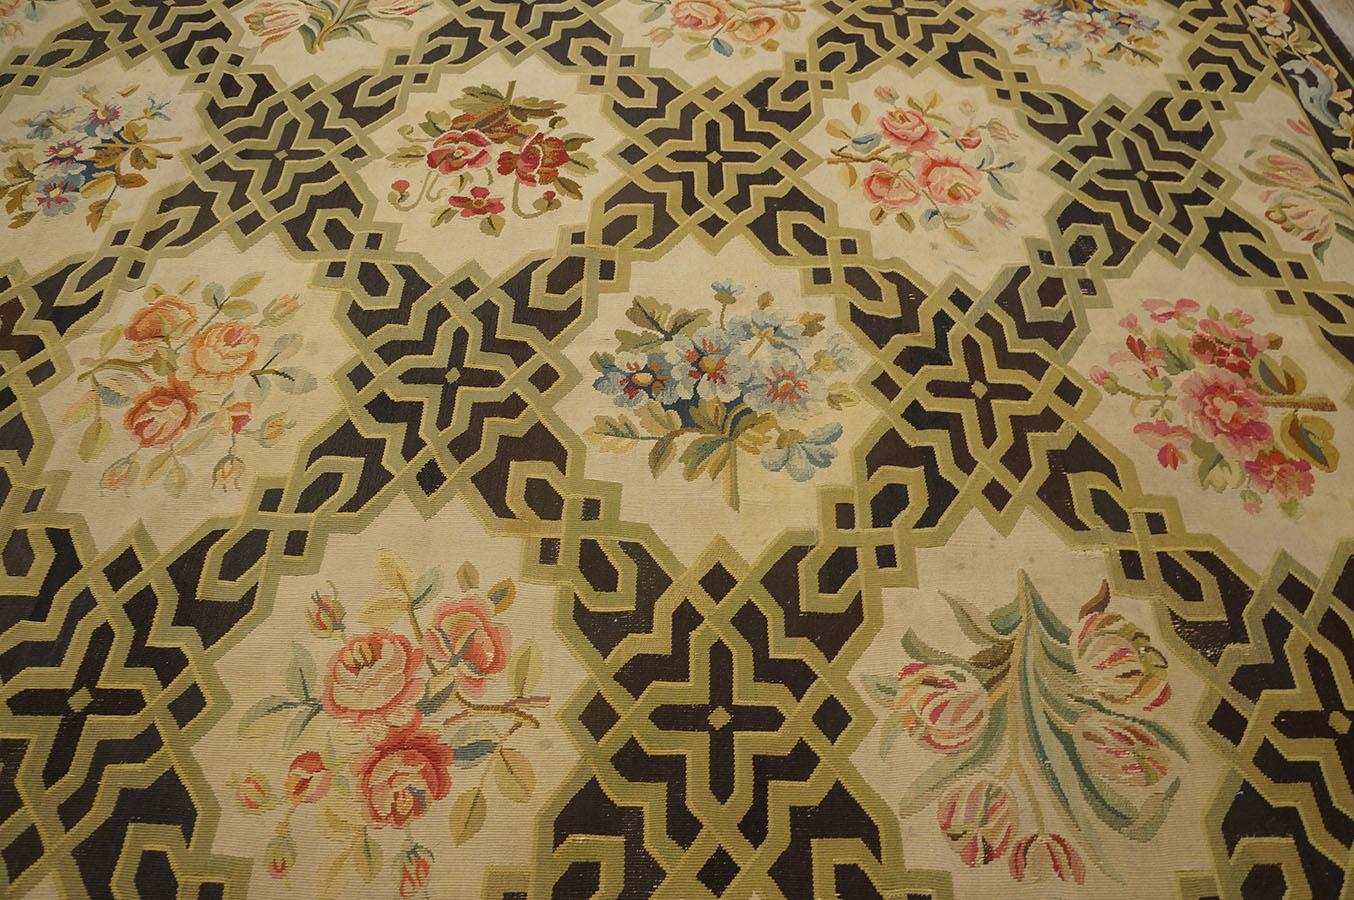 Early 20th Century French Aubusson Carpet ( 9' 8'' x 15' 3'' - 295 x 465 cm ) For Sale 8